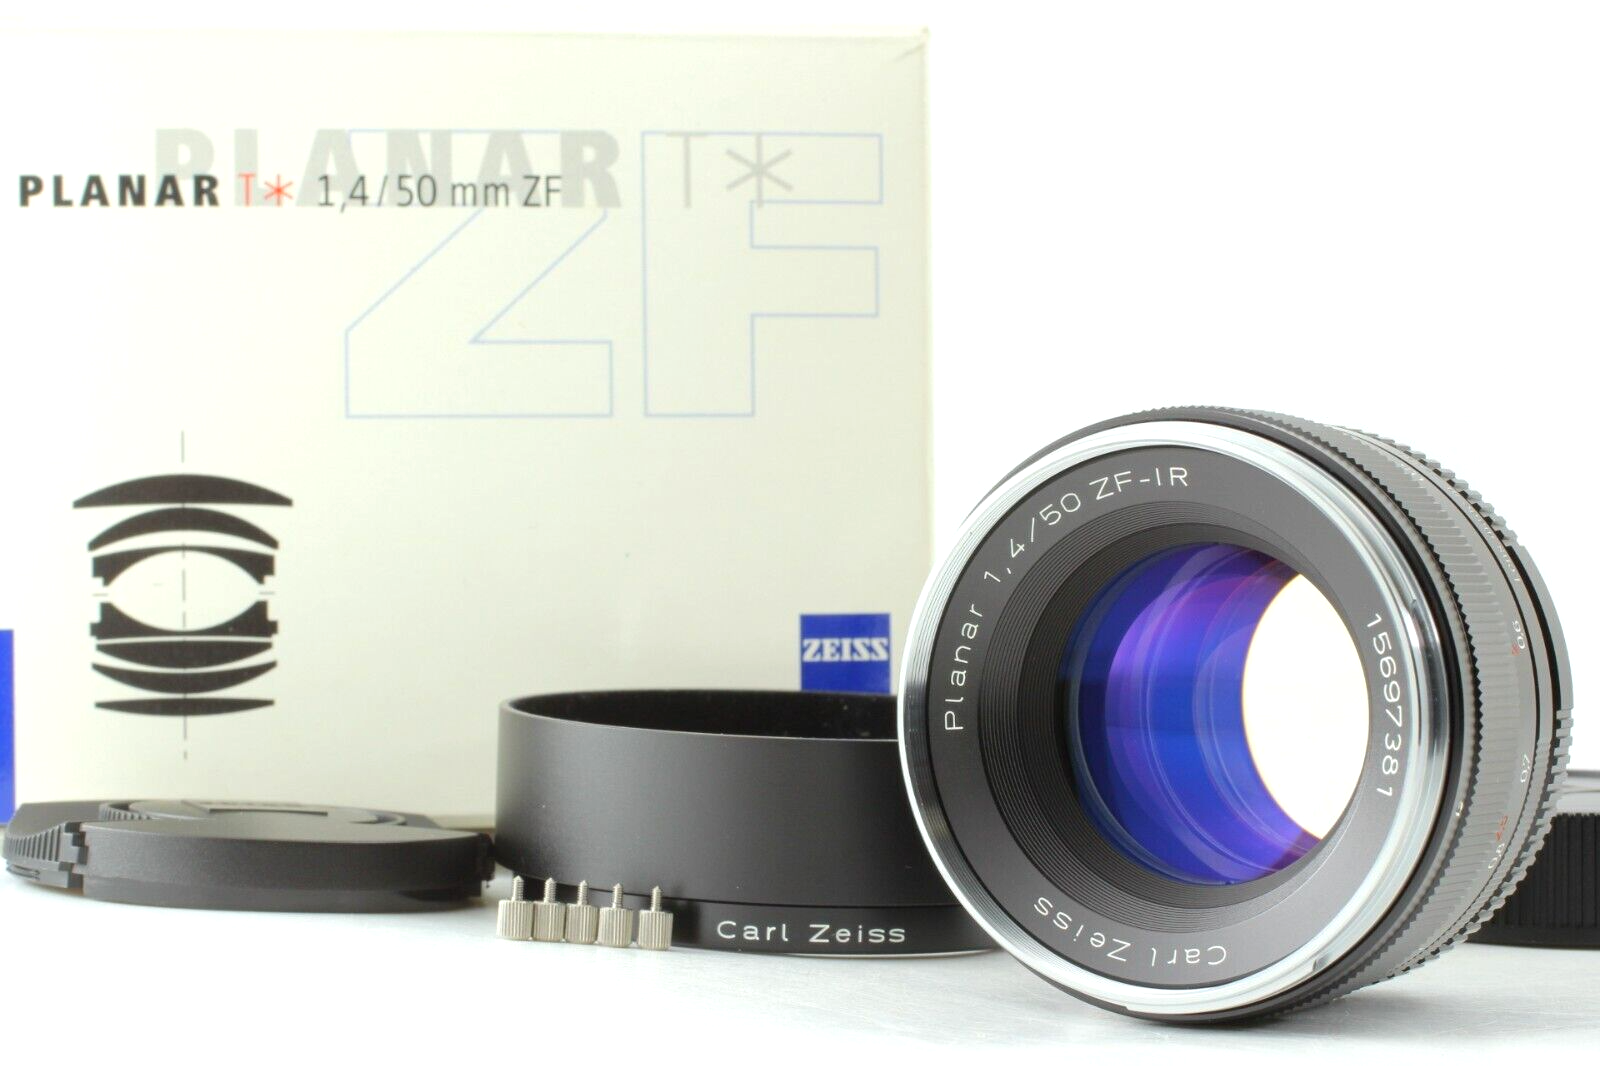 A rare Zeiss lens variant for infrared photography is currently up on eBay